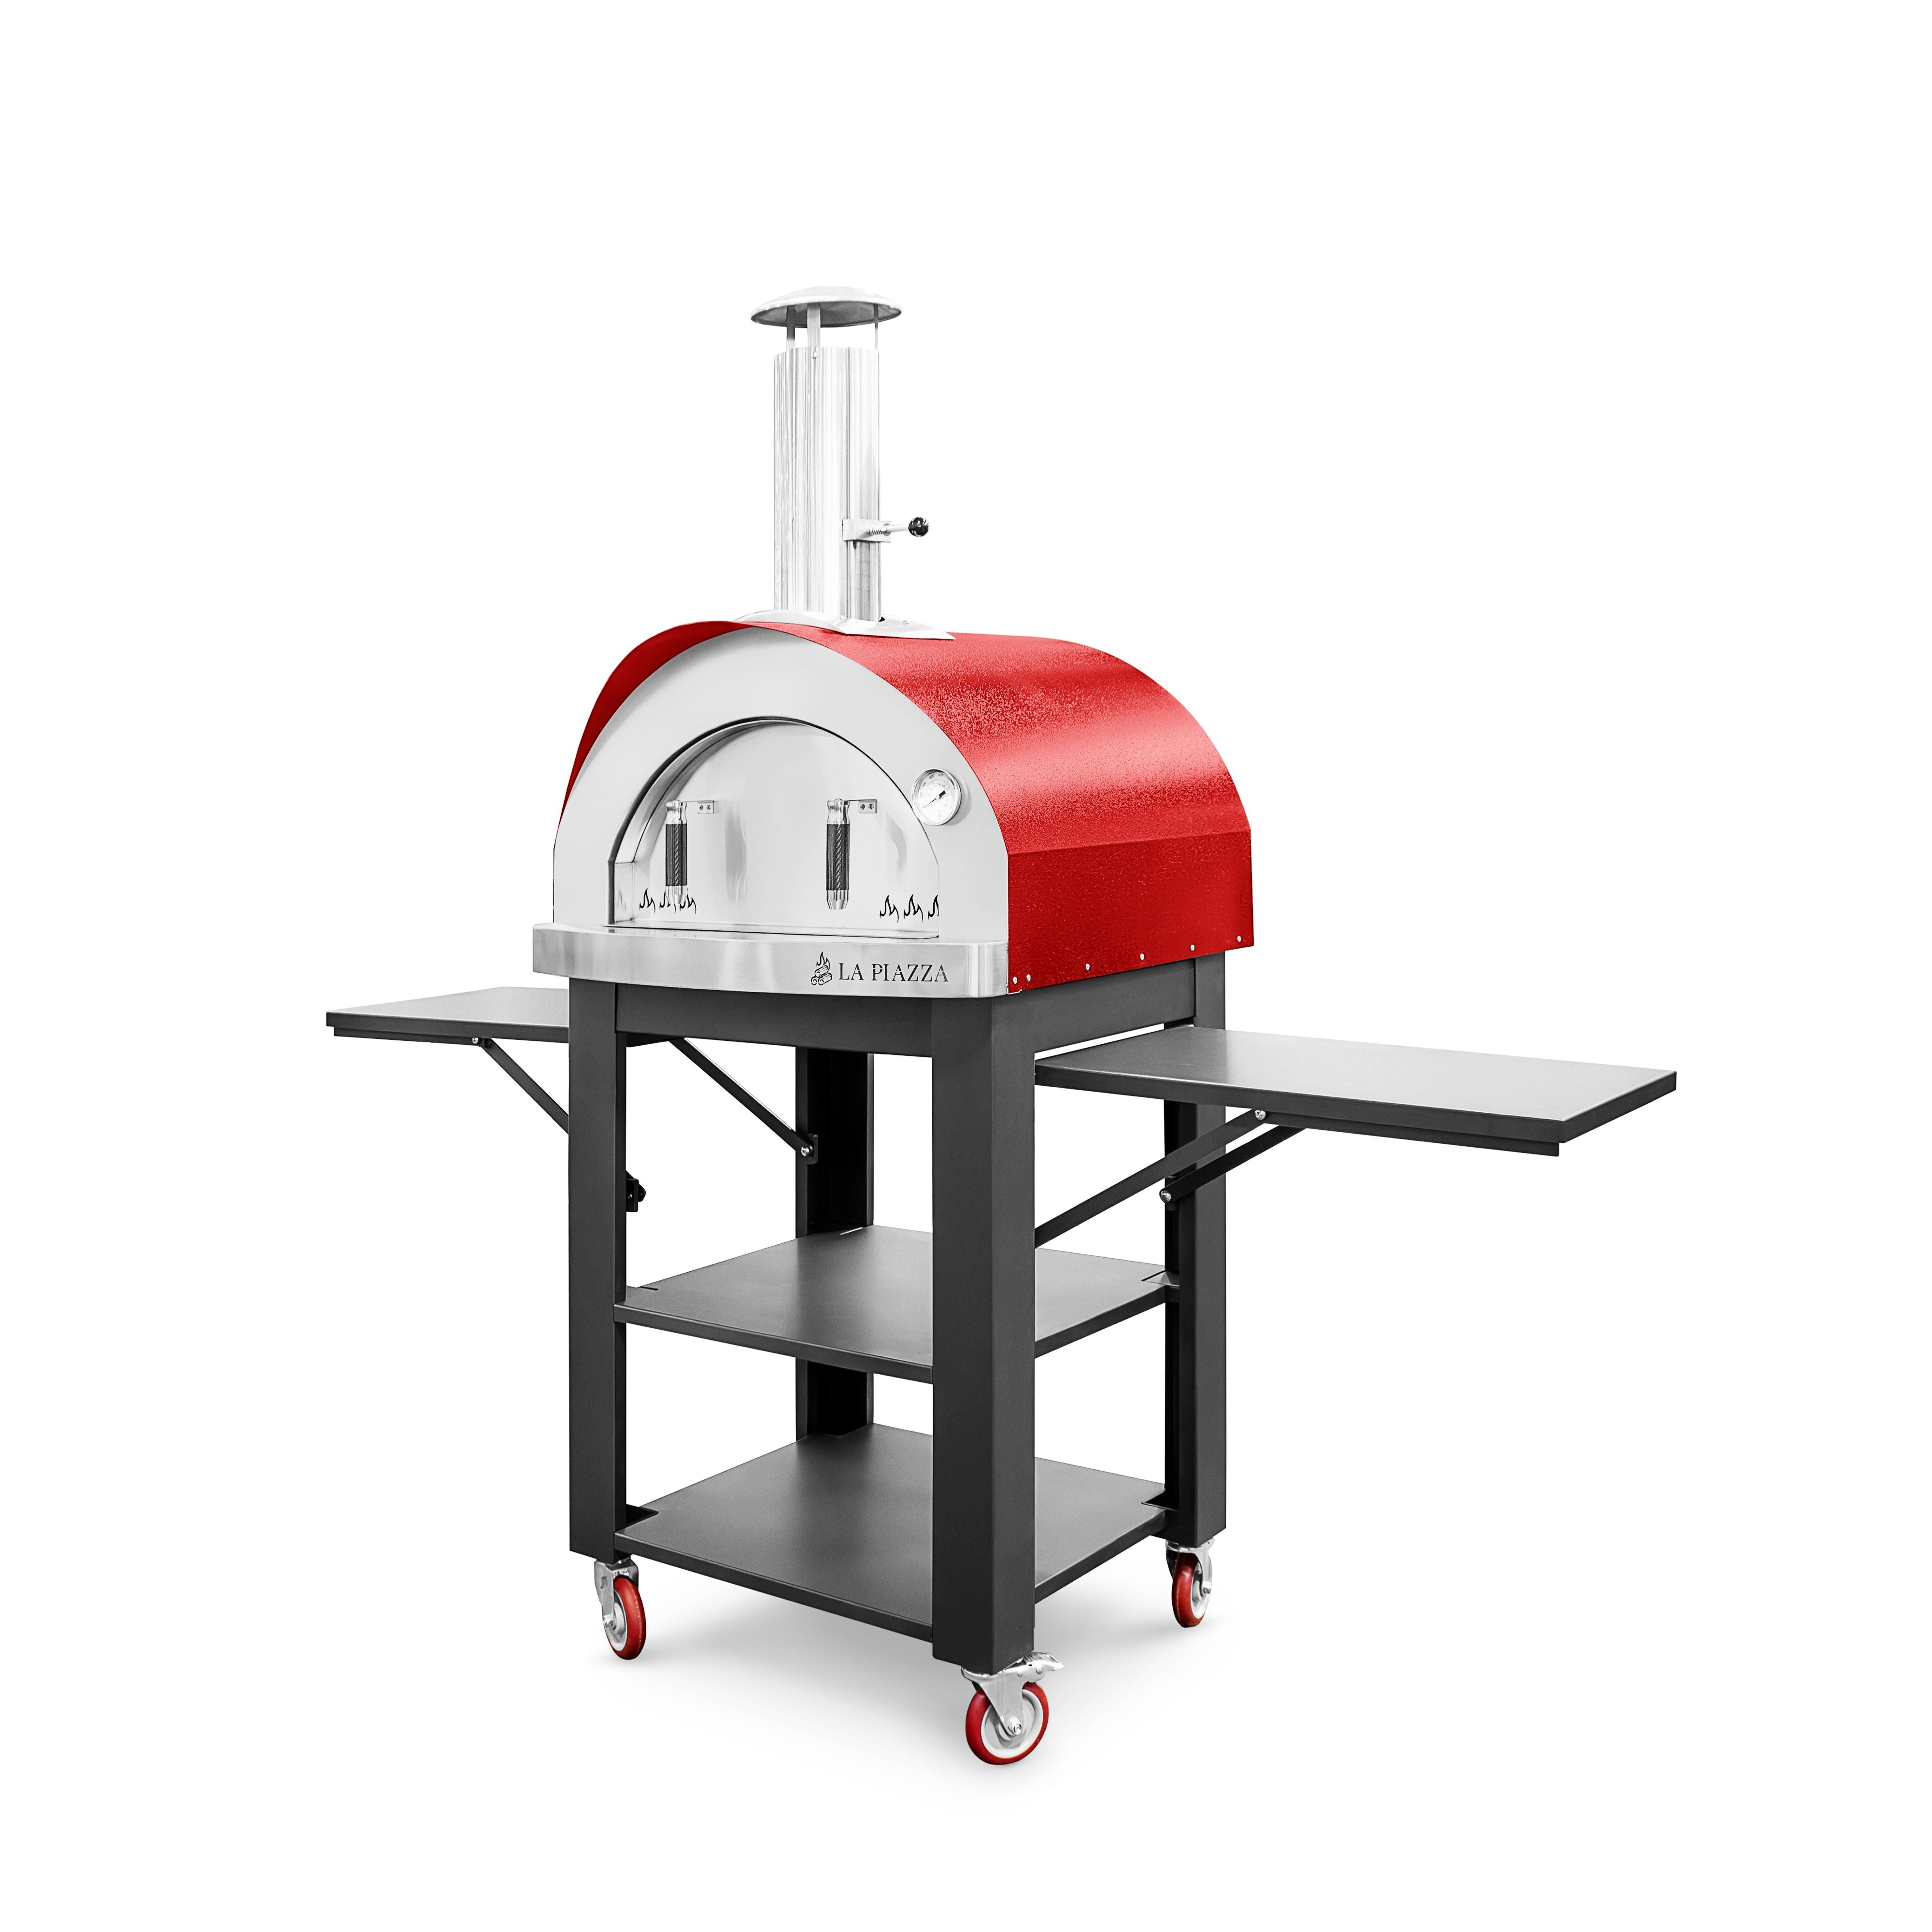 Piccolo Wood Oven with Stainless Steel Base - Red